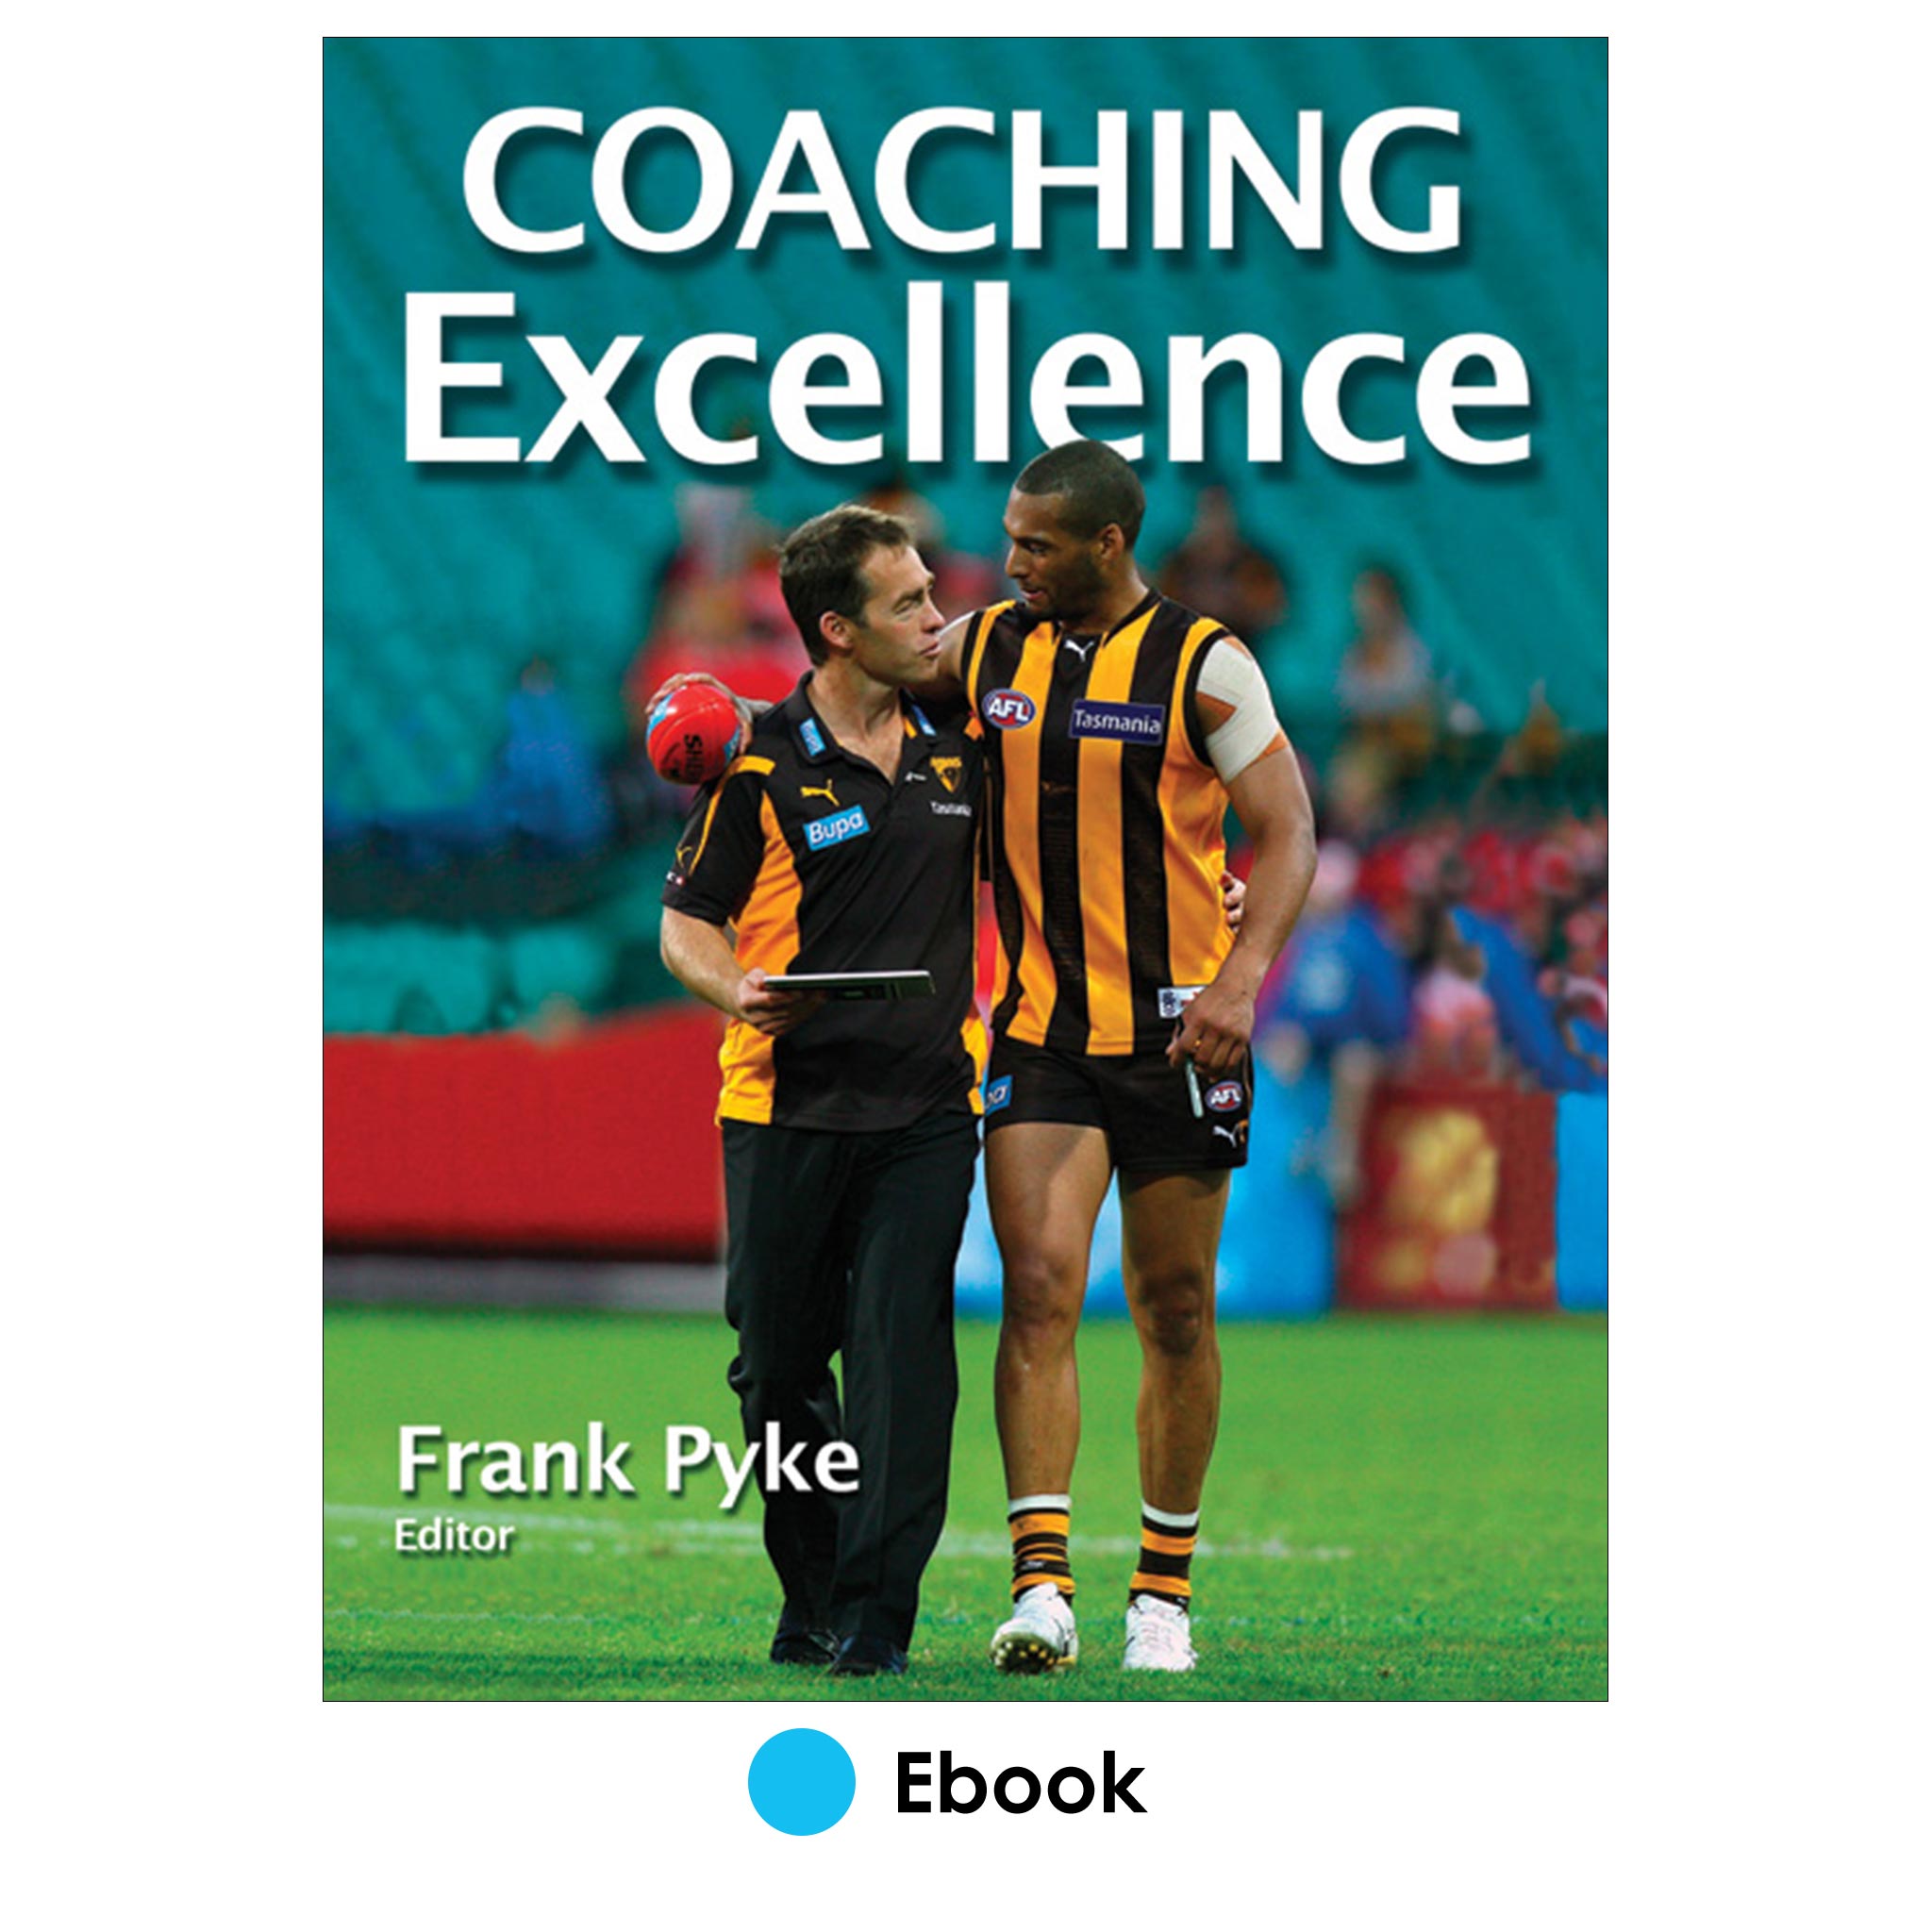 Coaching Excellence PDF